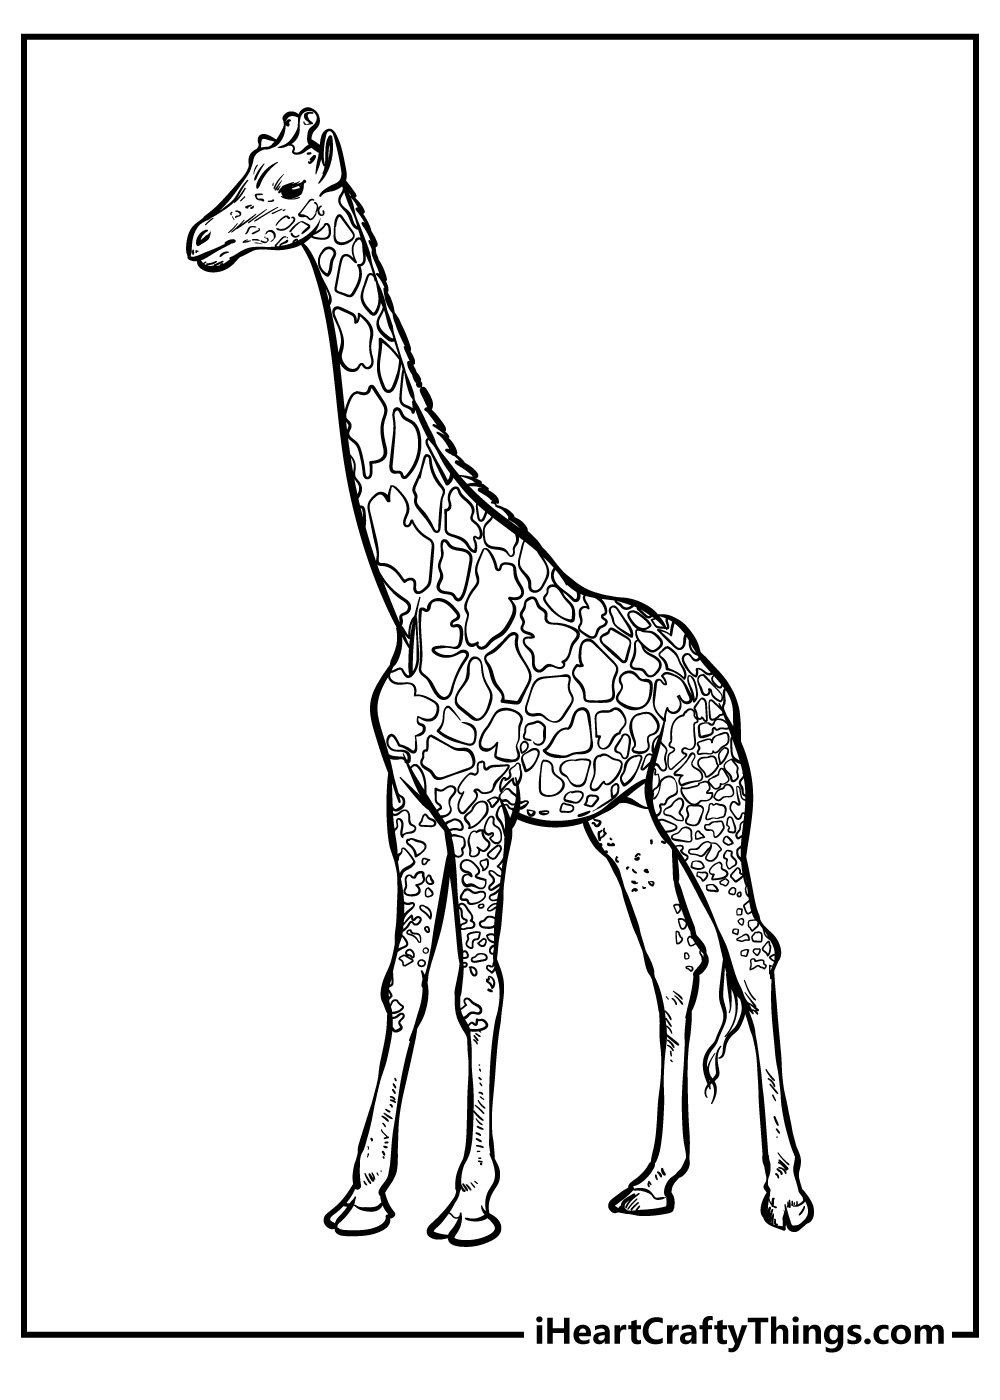 Zoo Animals Coloring Pages free pdf download